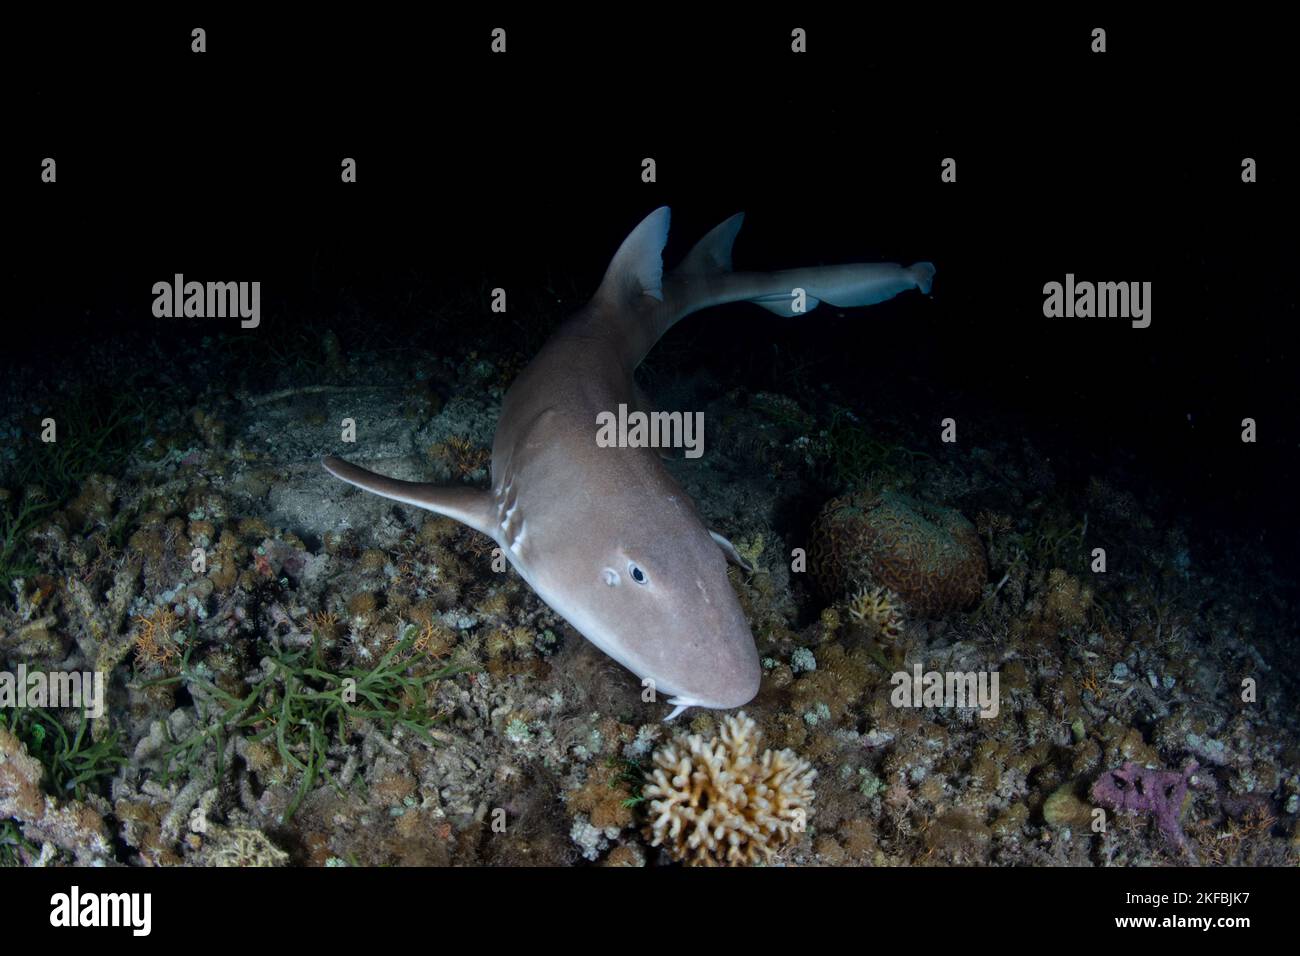 A Brownbanded bamboo shark, Chiloscyllium punctatum, hunts for prey in the dark of night on a coral reef in Komodo National Park, Indonesia. Stock Photo